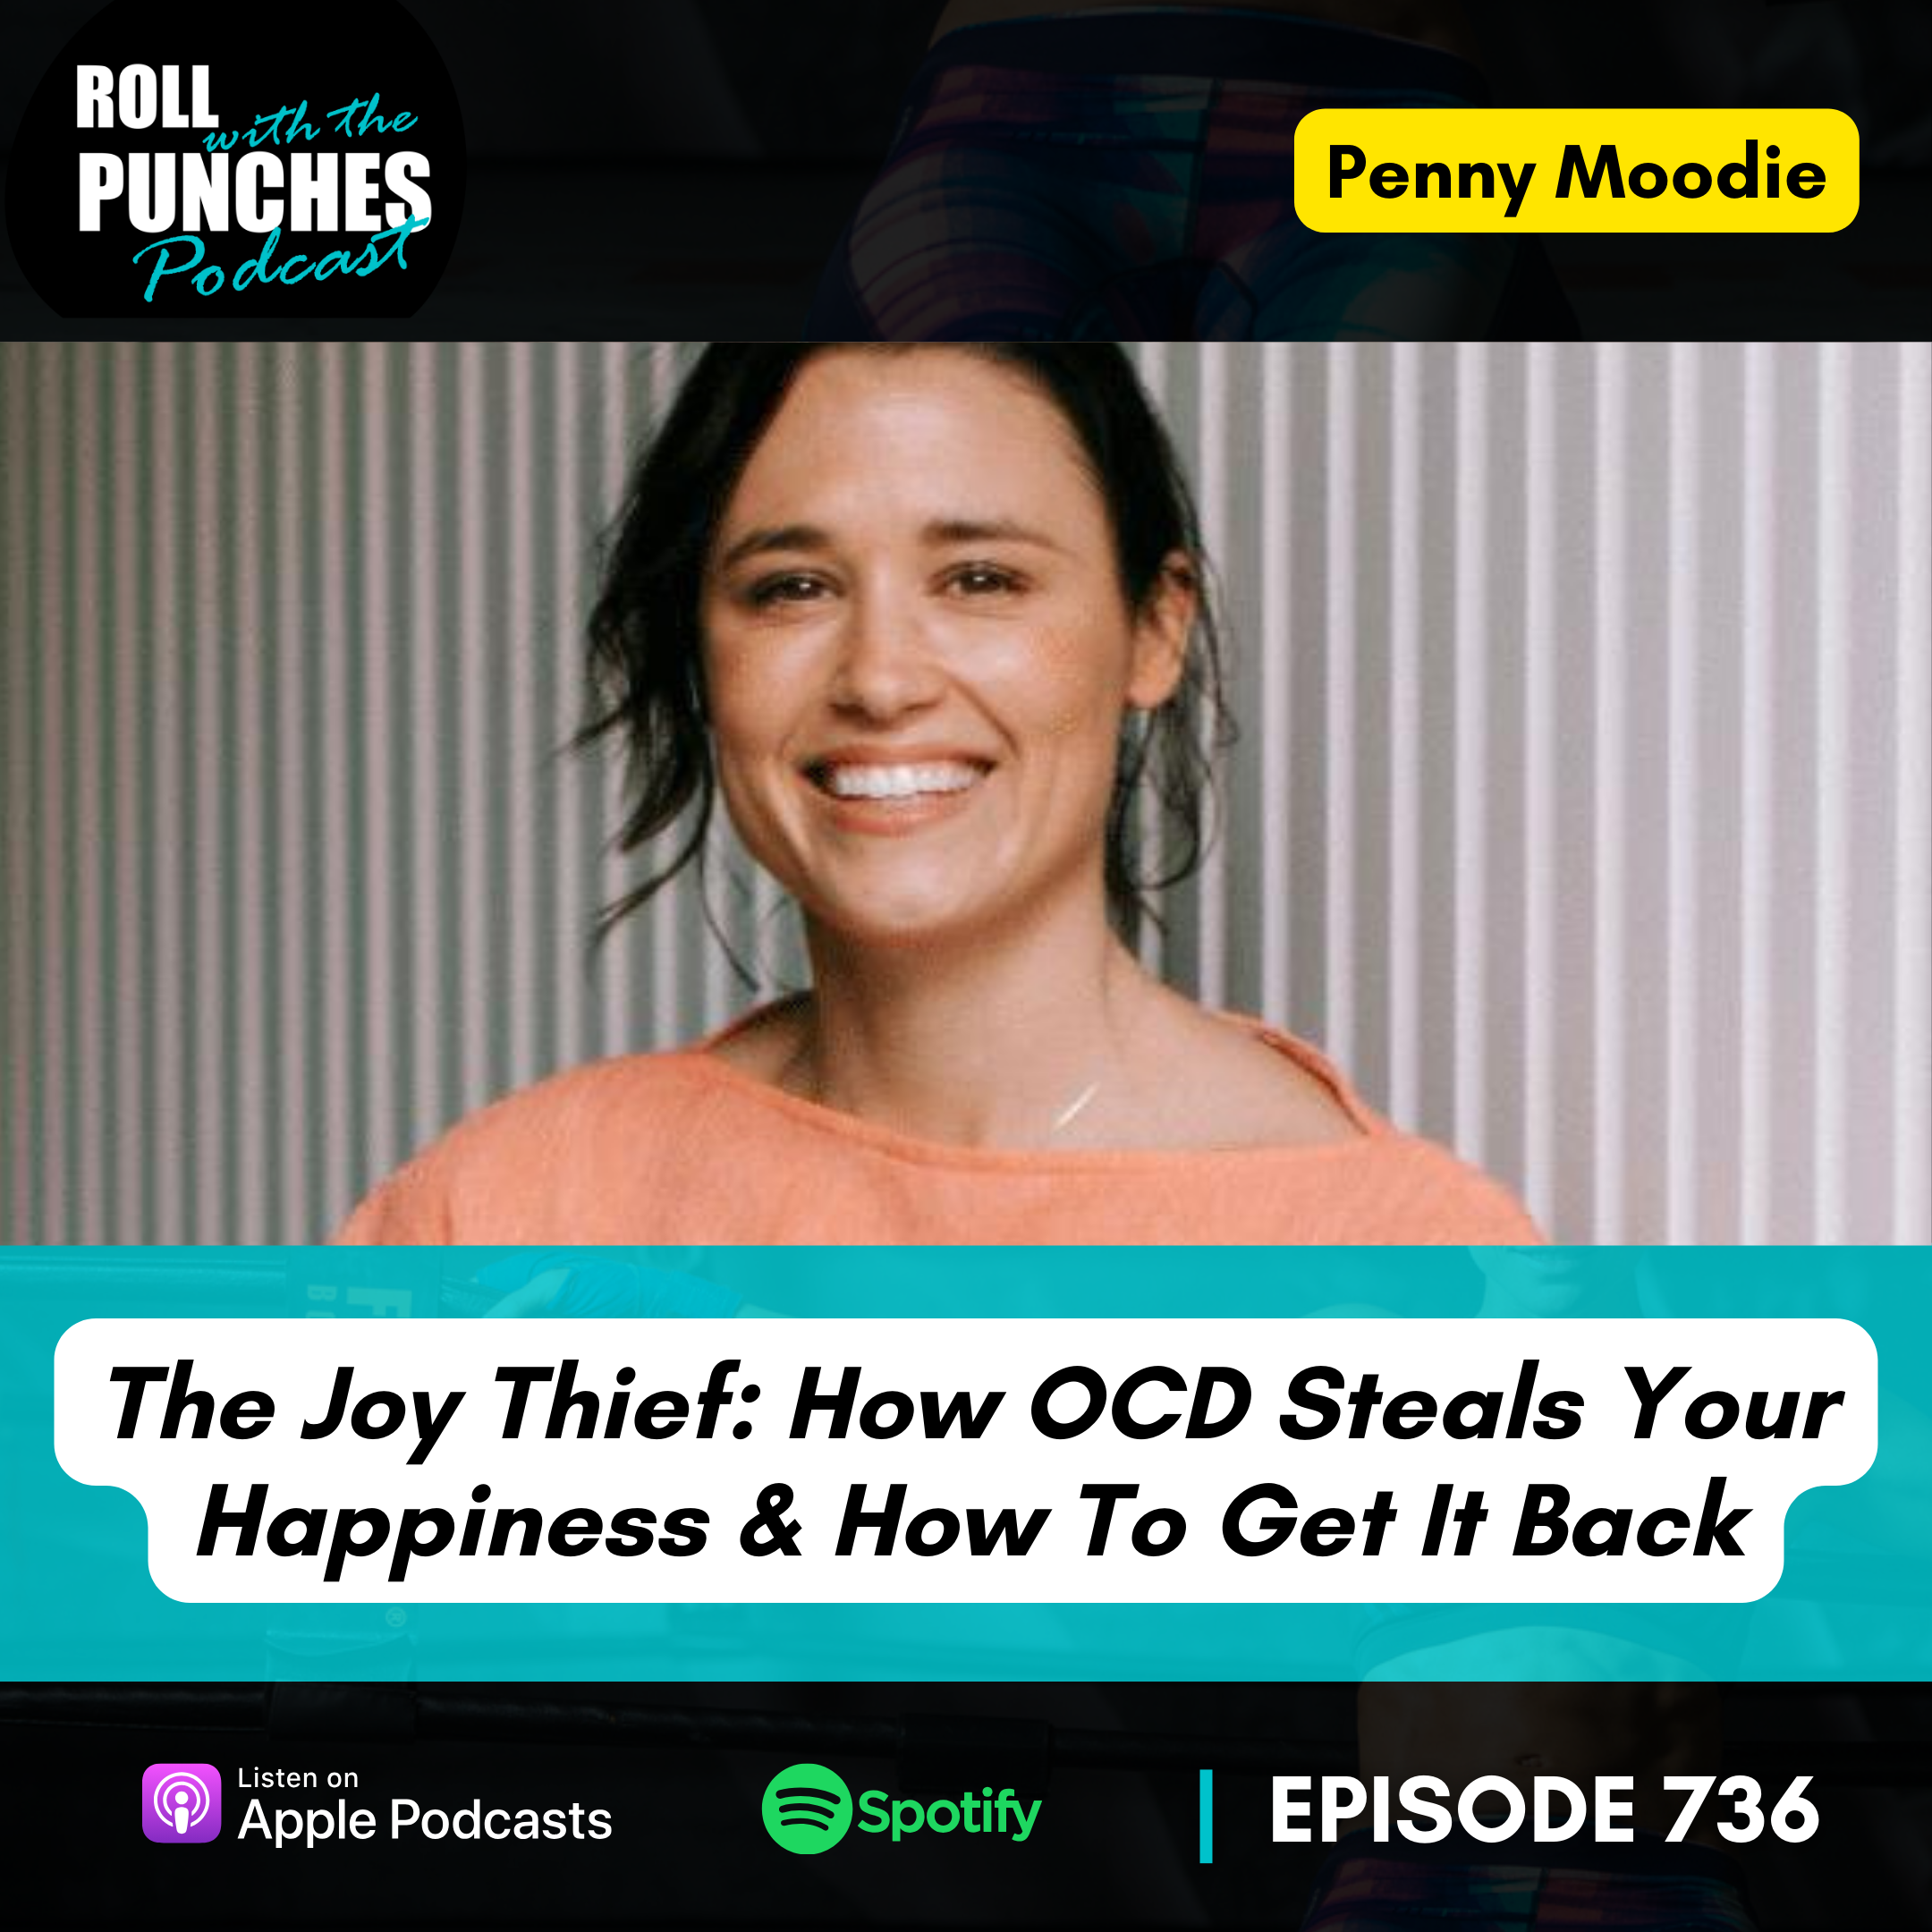 The Joy Thief: How OCD Steals Your Happiness & How To Get It Back - Penny Moodie - 736